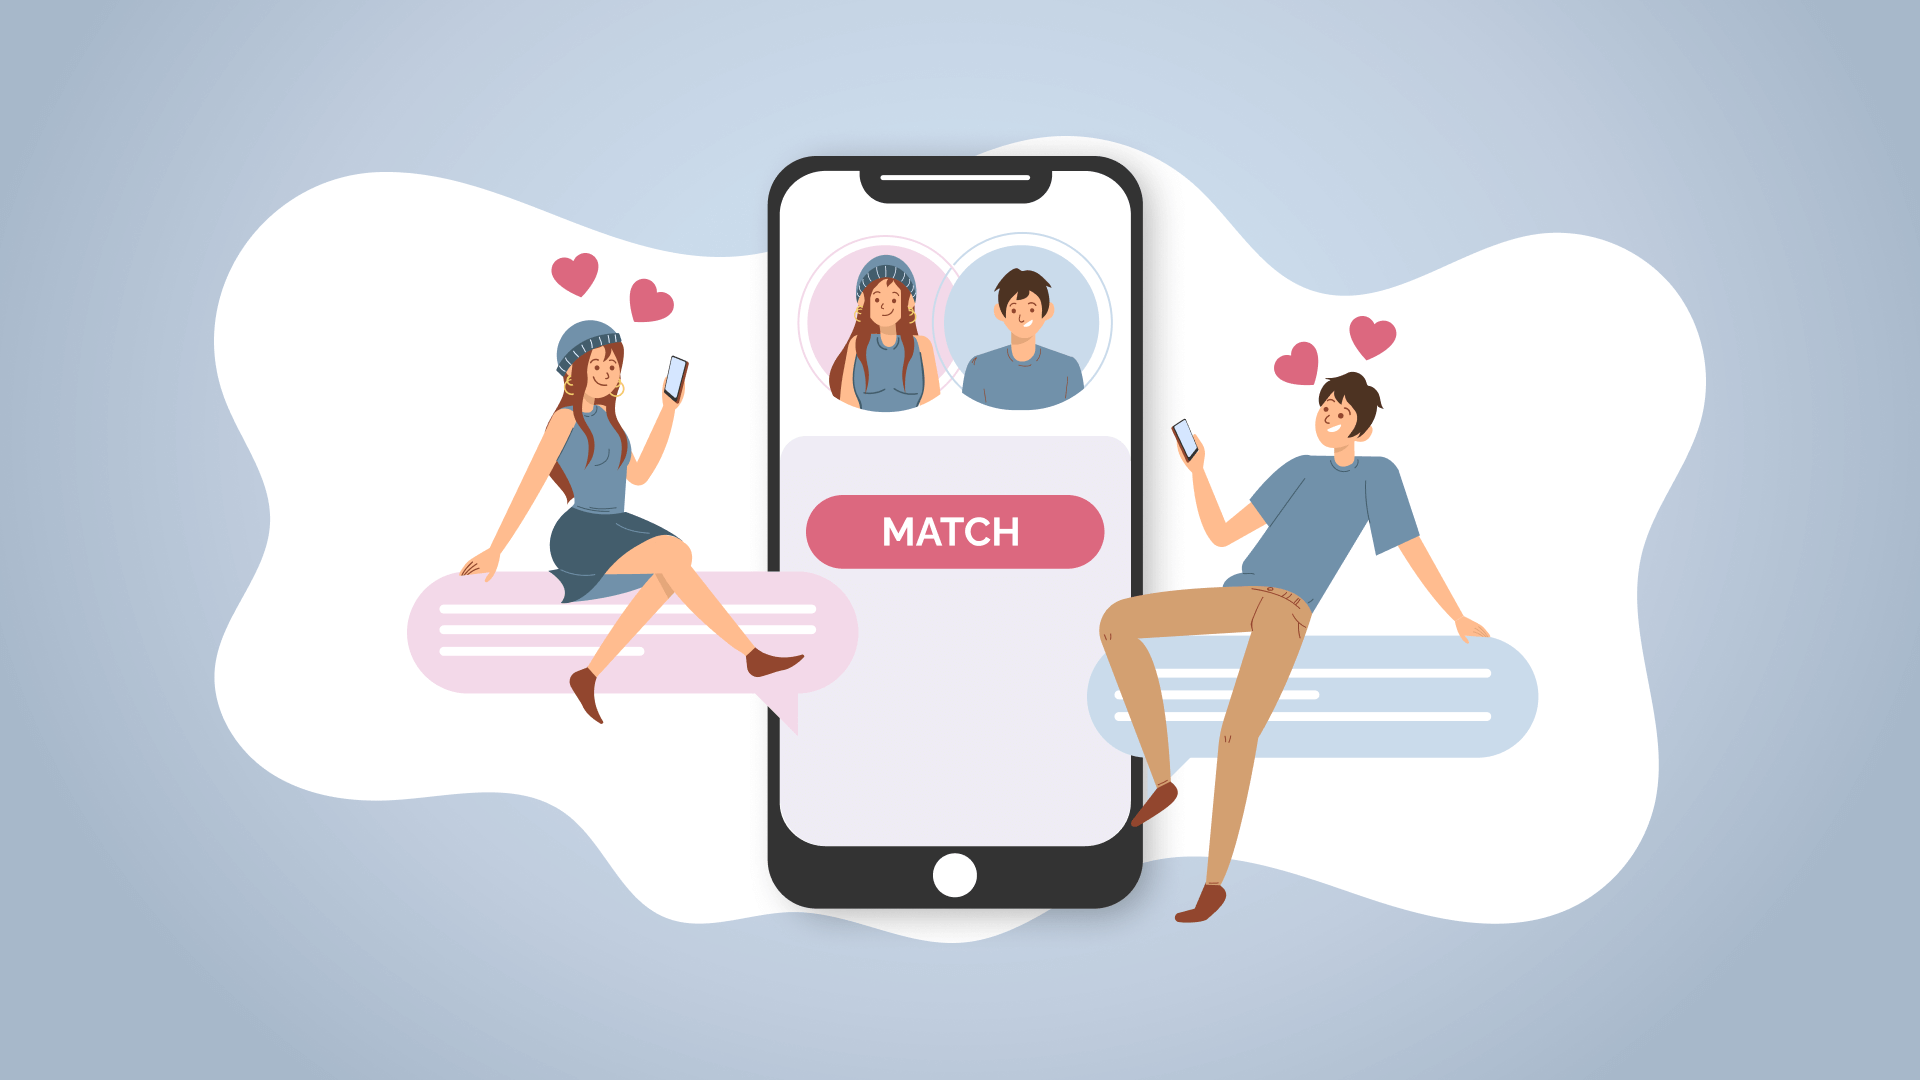 Basic info about how online dating platforms function.